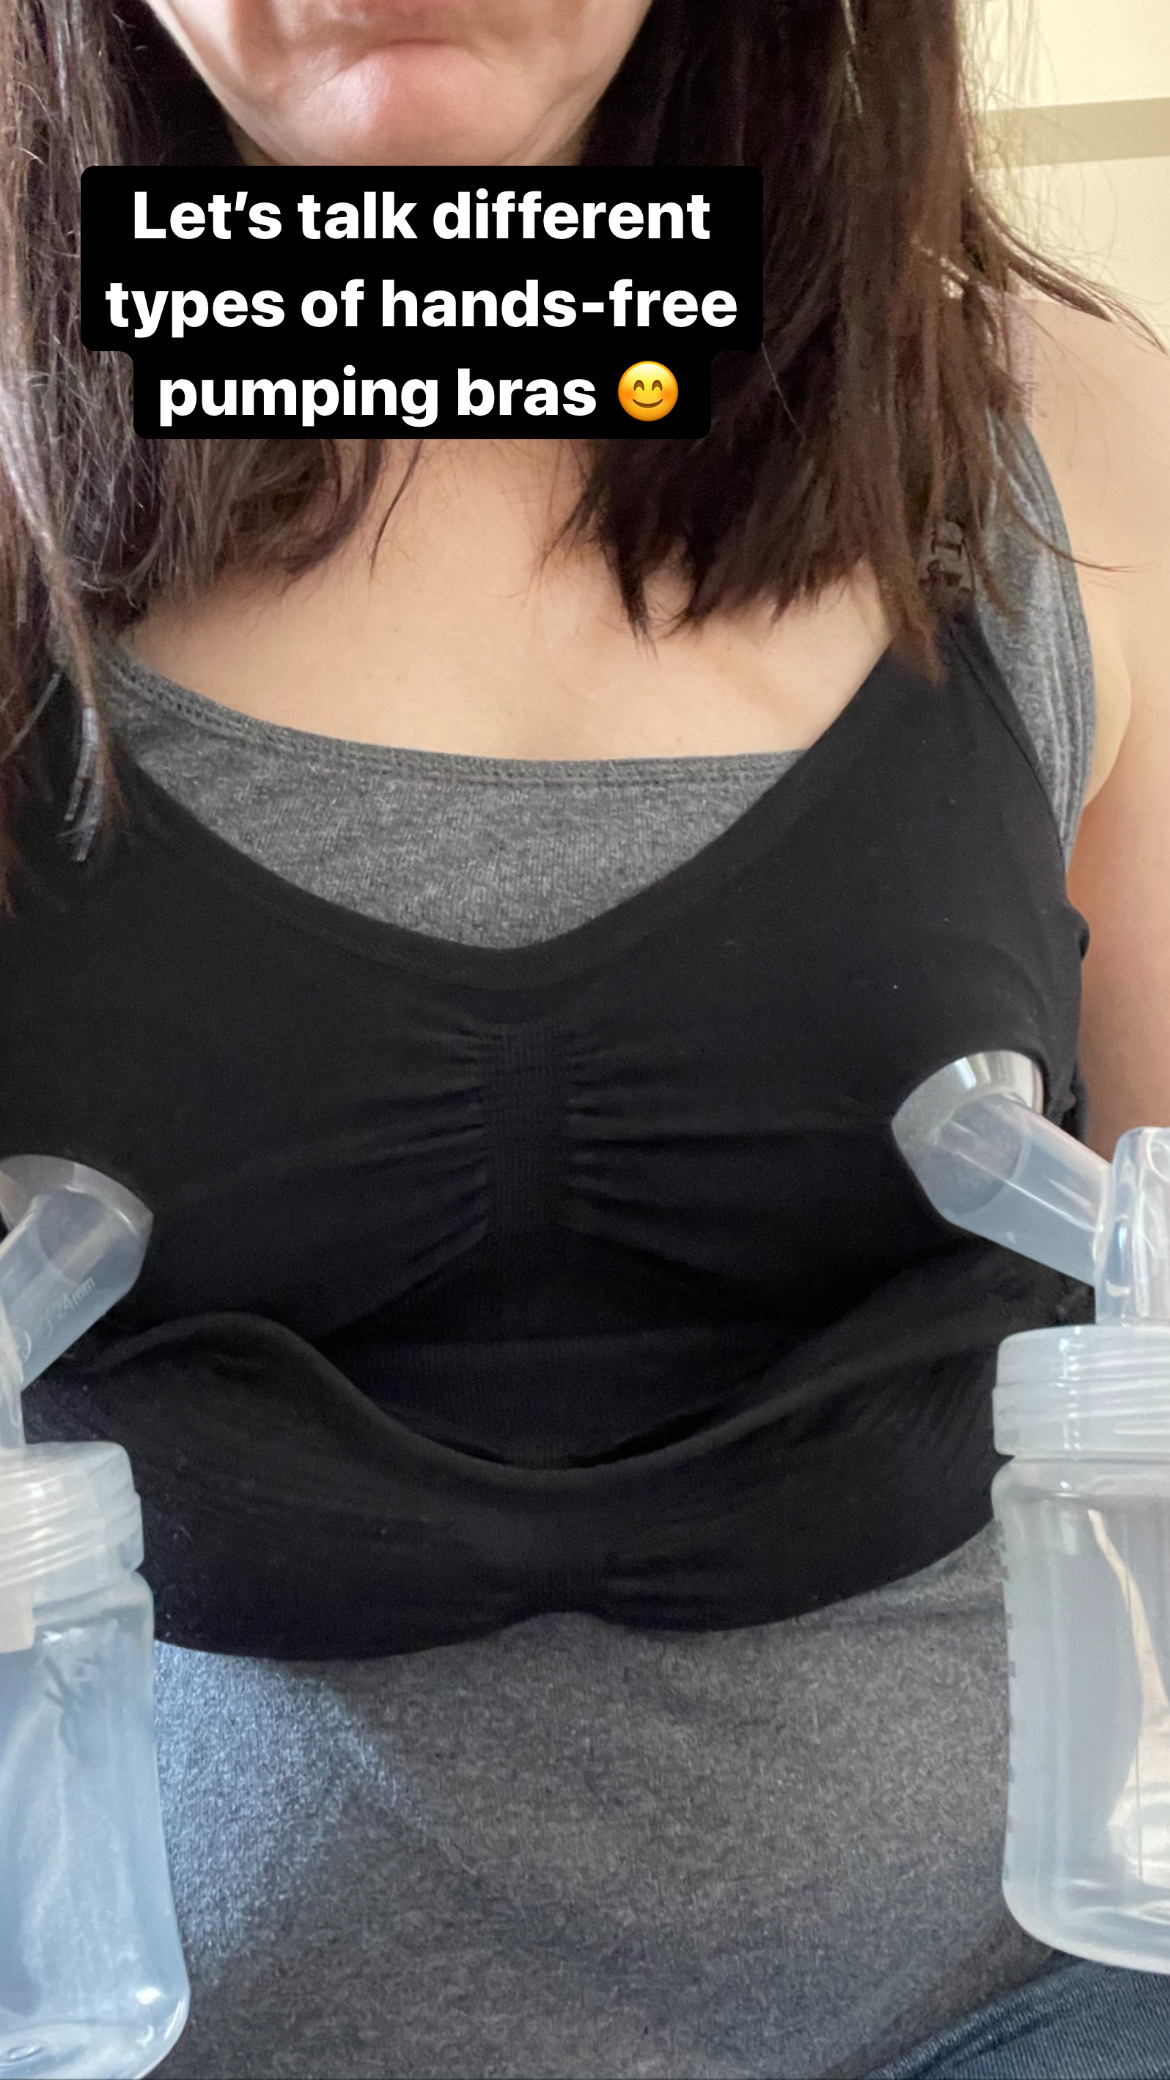 How To Insert Breast Shields in Your Simple Wishes Pumping Bra